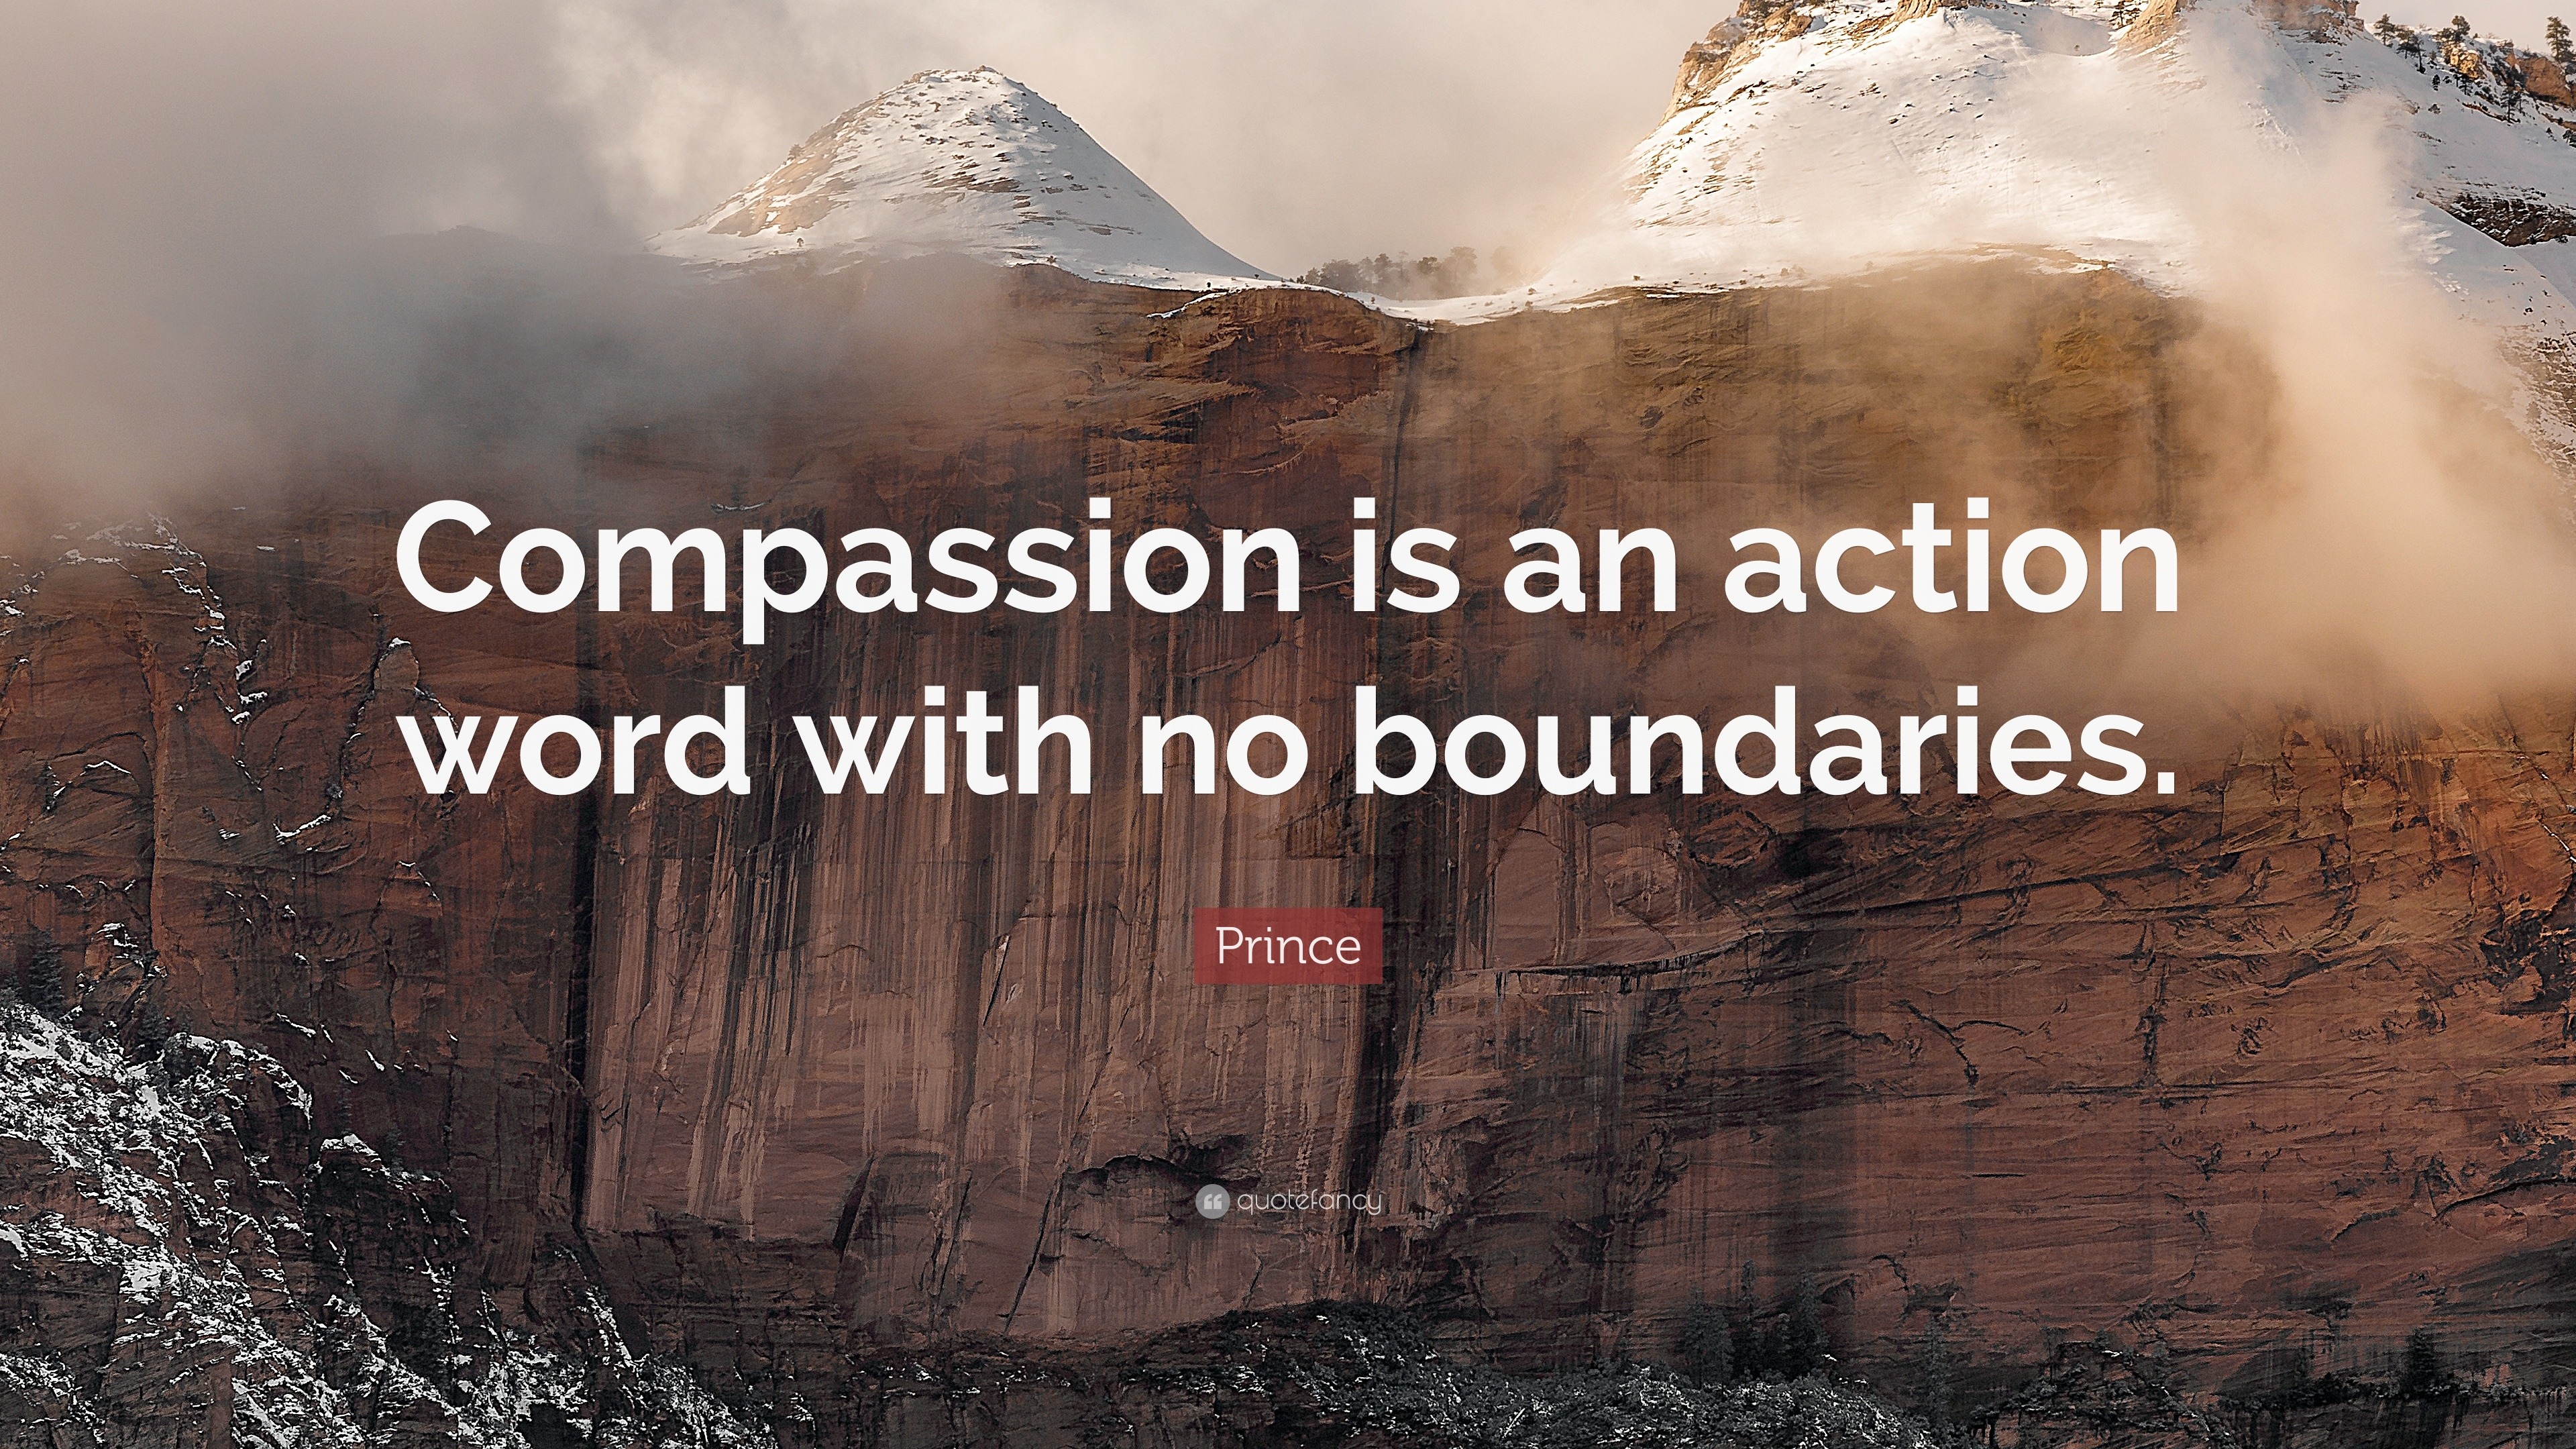 Prince Quote: “Compassion is an action word with no boundaries.” (12